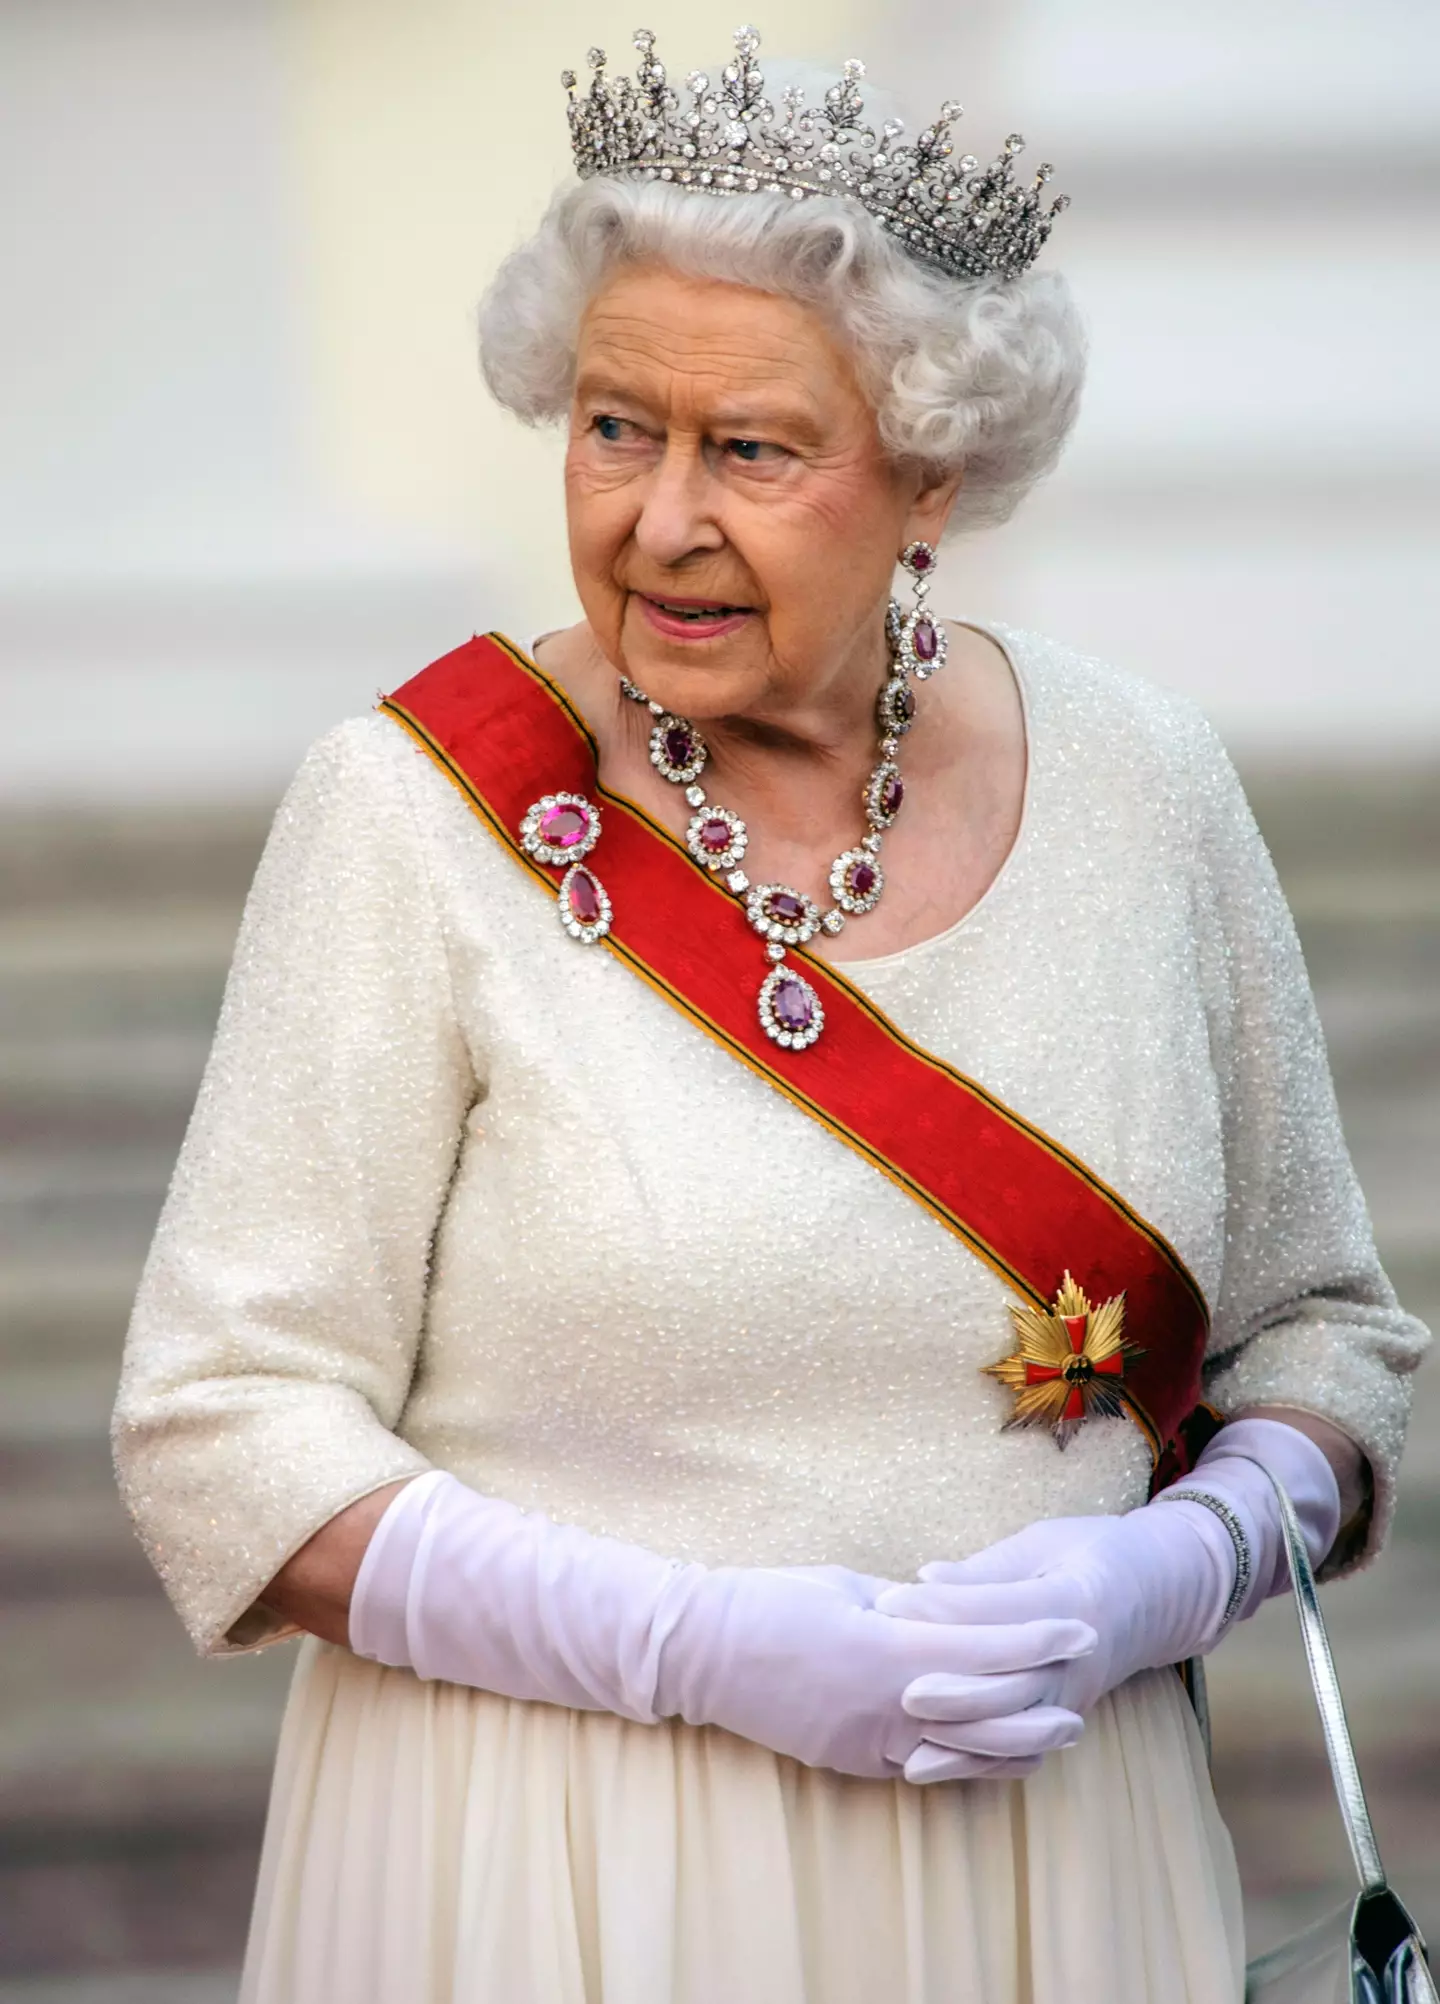 After the death of Queen Elizabeth II, many called for the jewel to be returned to South Africa.